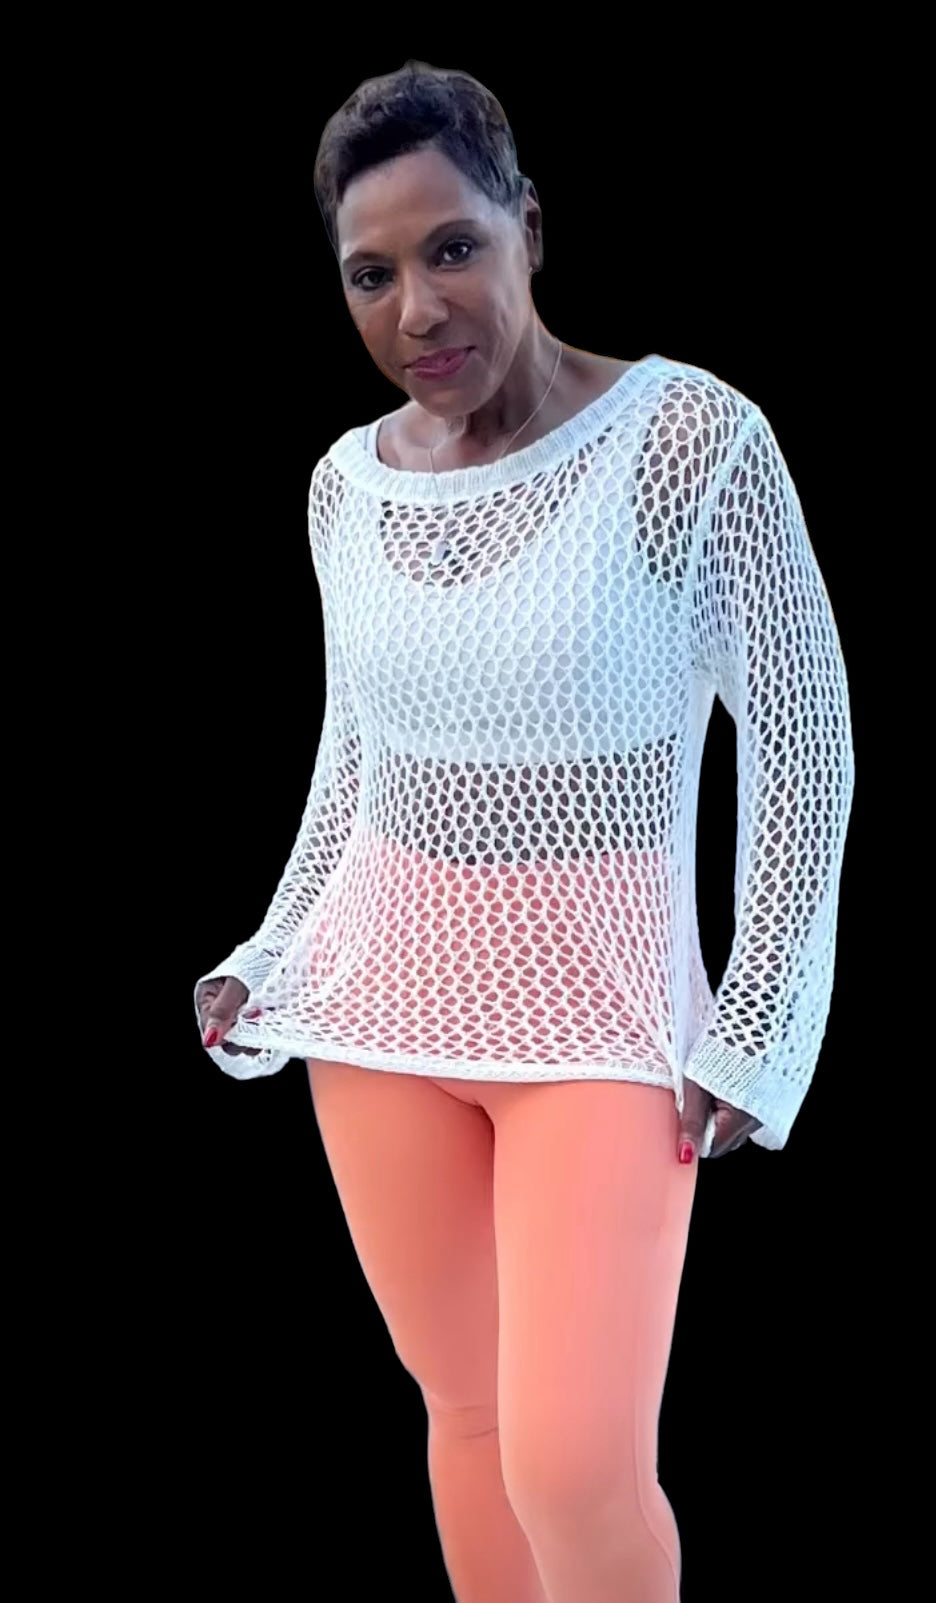 I AM Sexy: Vacation Crochet Long Sleeve Cover Up Sweater